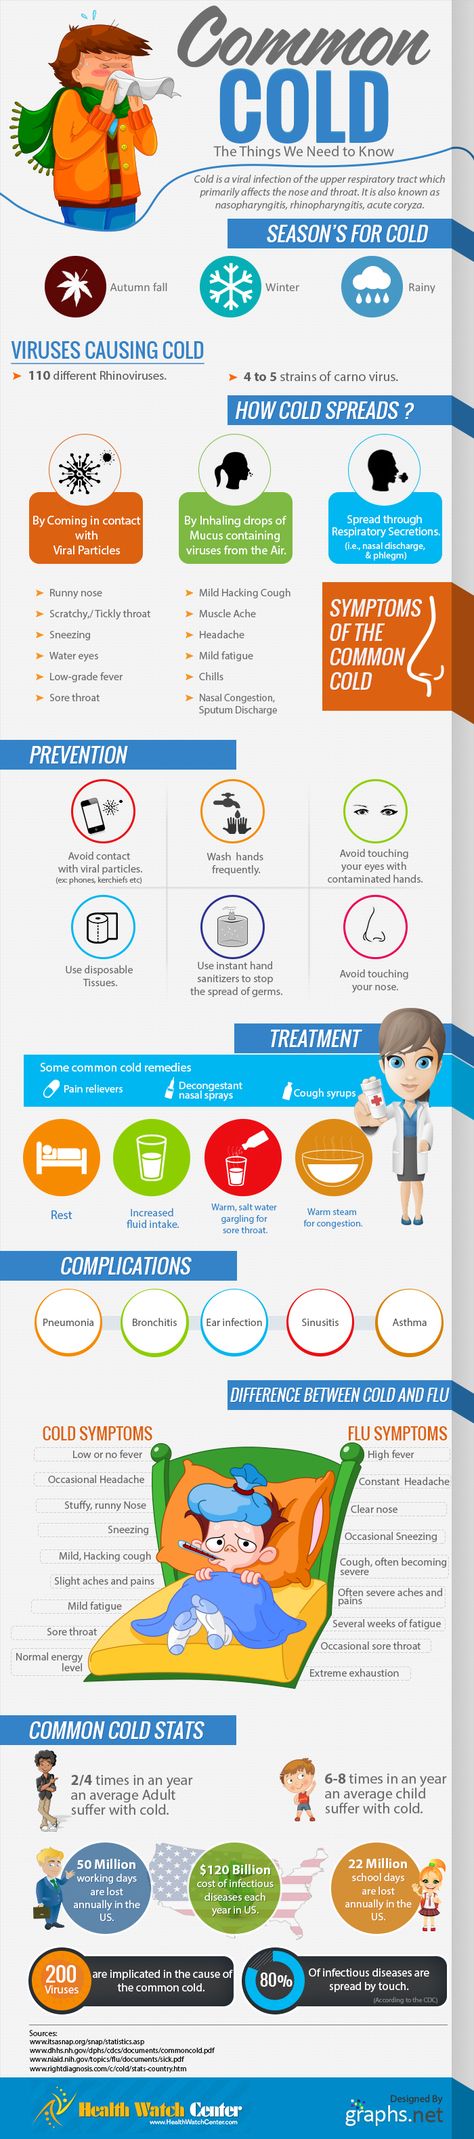 Common cold the things we need to know | Visual.ly Cold Symptoms, Cold Prevention, Infographic Health, Common Cold, Cough Remedies, Cold Remedies, Health Blog, Health Info, Health Advice